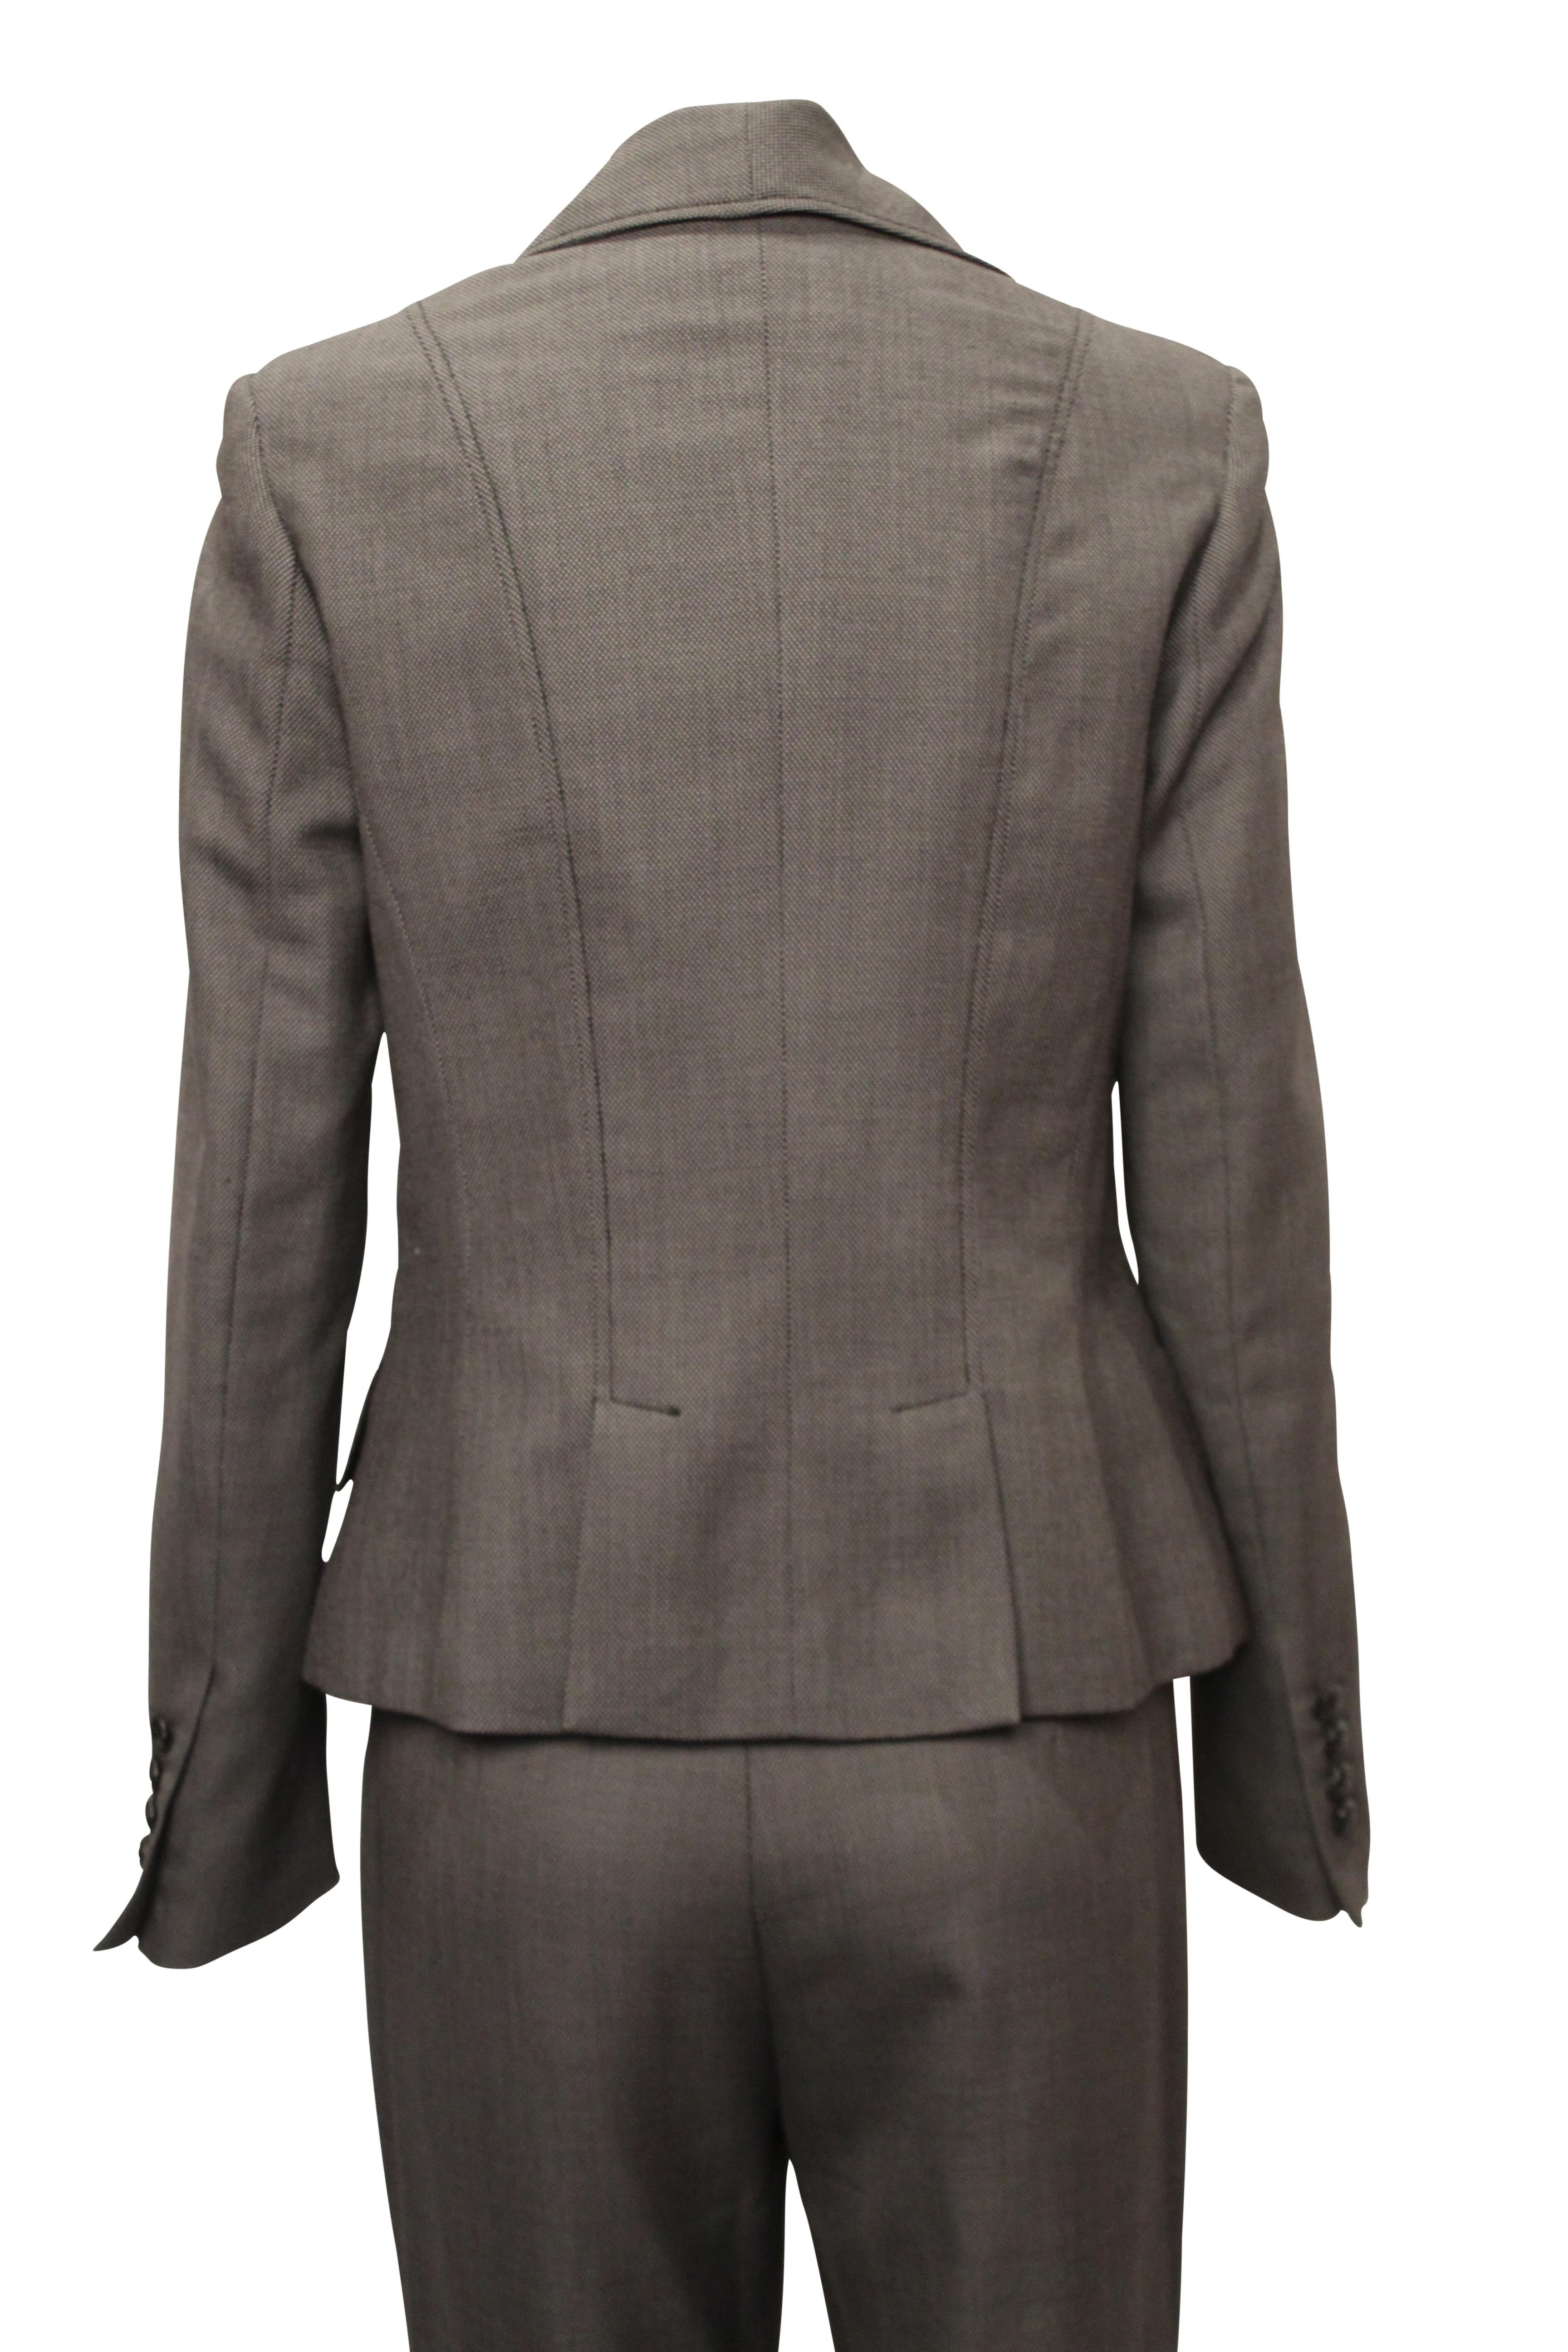 John Galliano Pant Suit  In Good Condition For Sale In Melbourne, Victoria